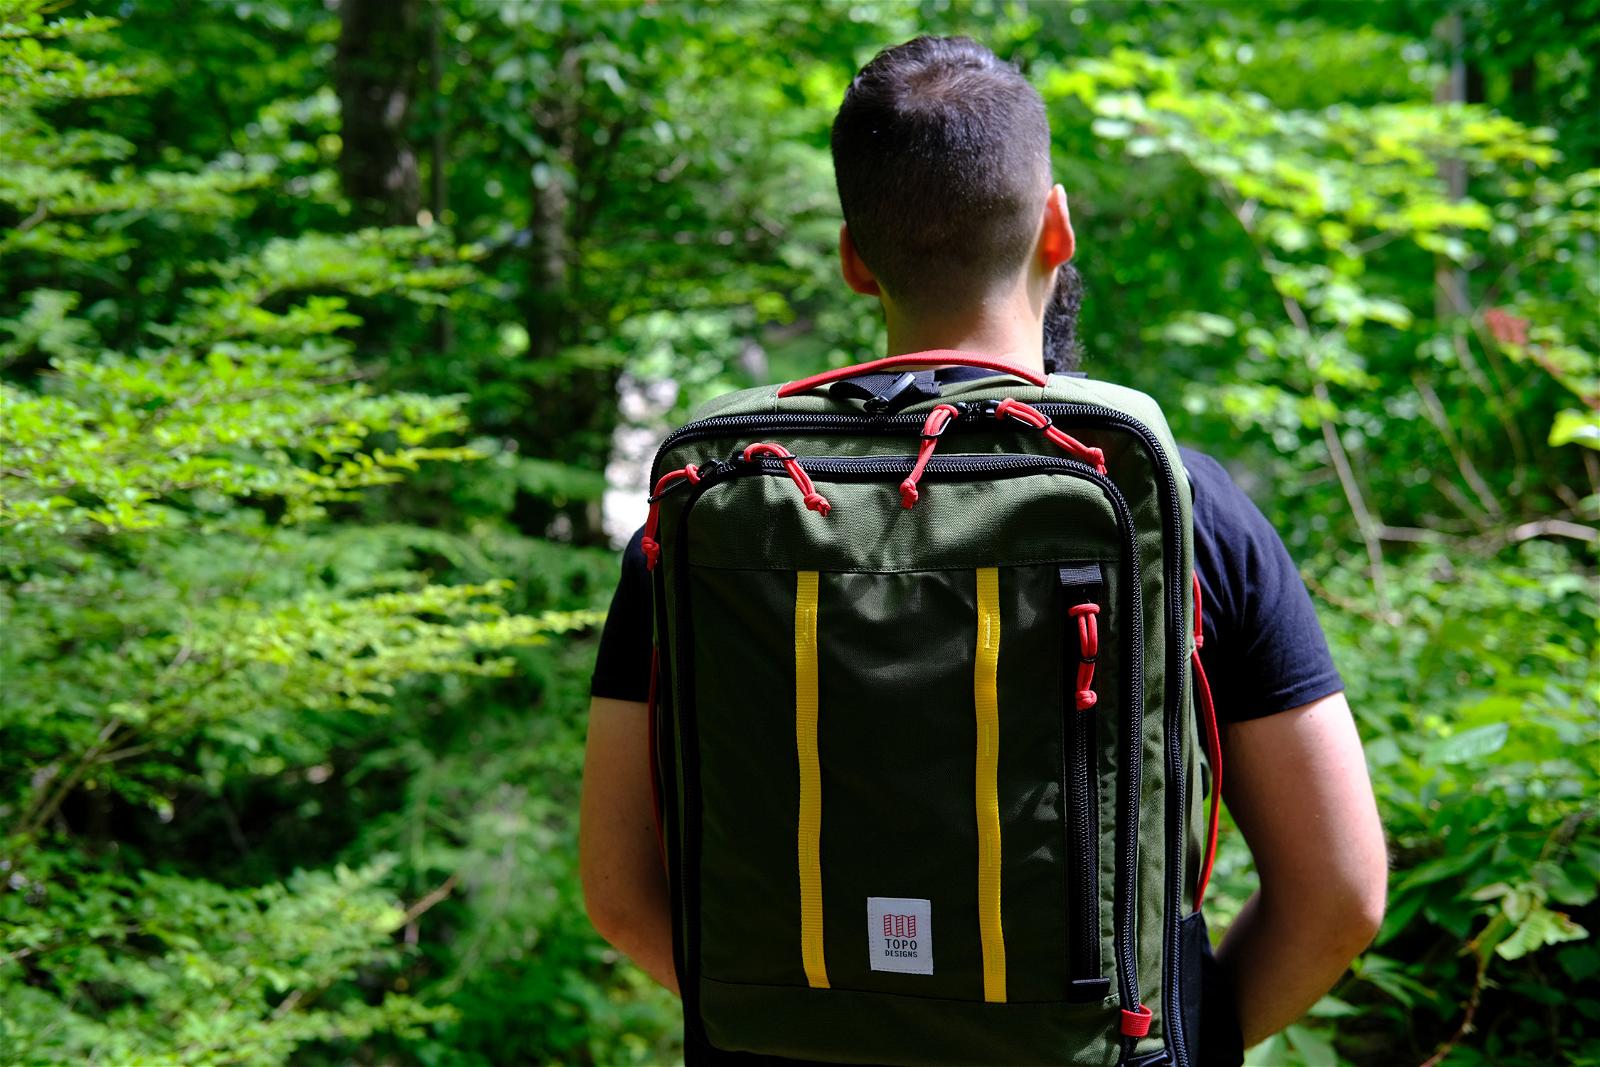 Topo Designs Global Travel Bag 30L Review: My Experience Using It